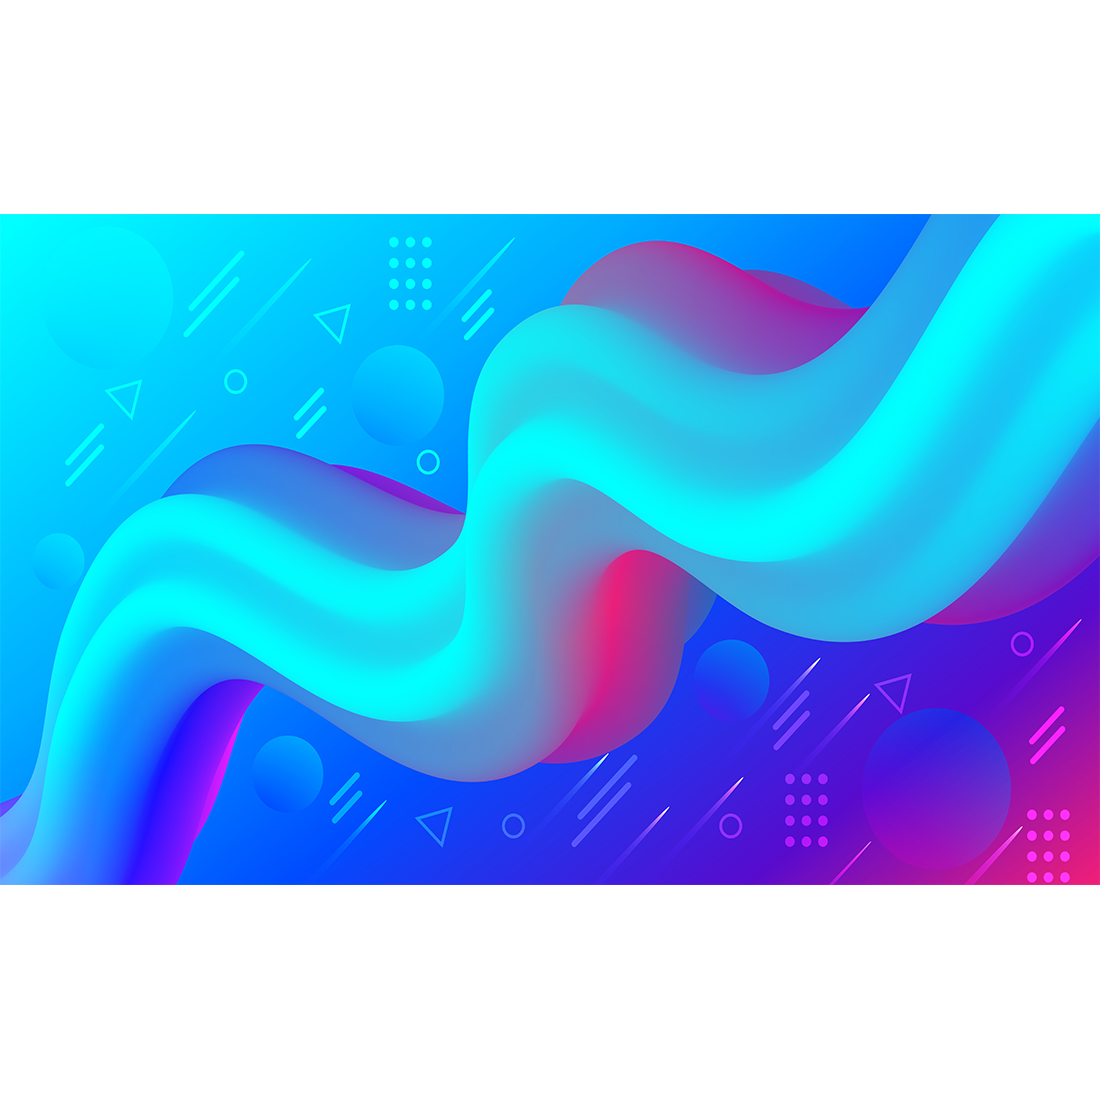 Fluid Background Design with Colorful Gradient cover image.